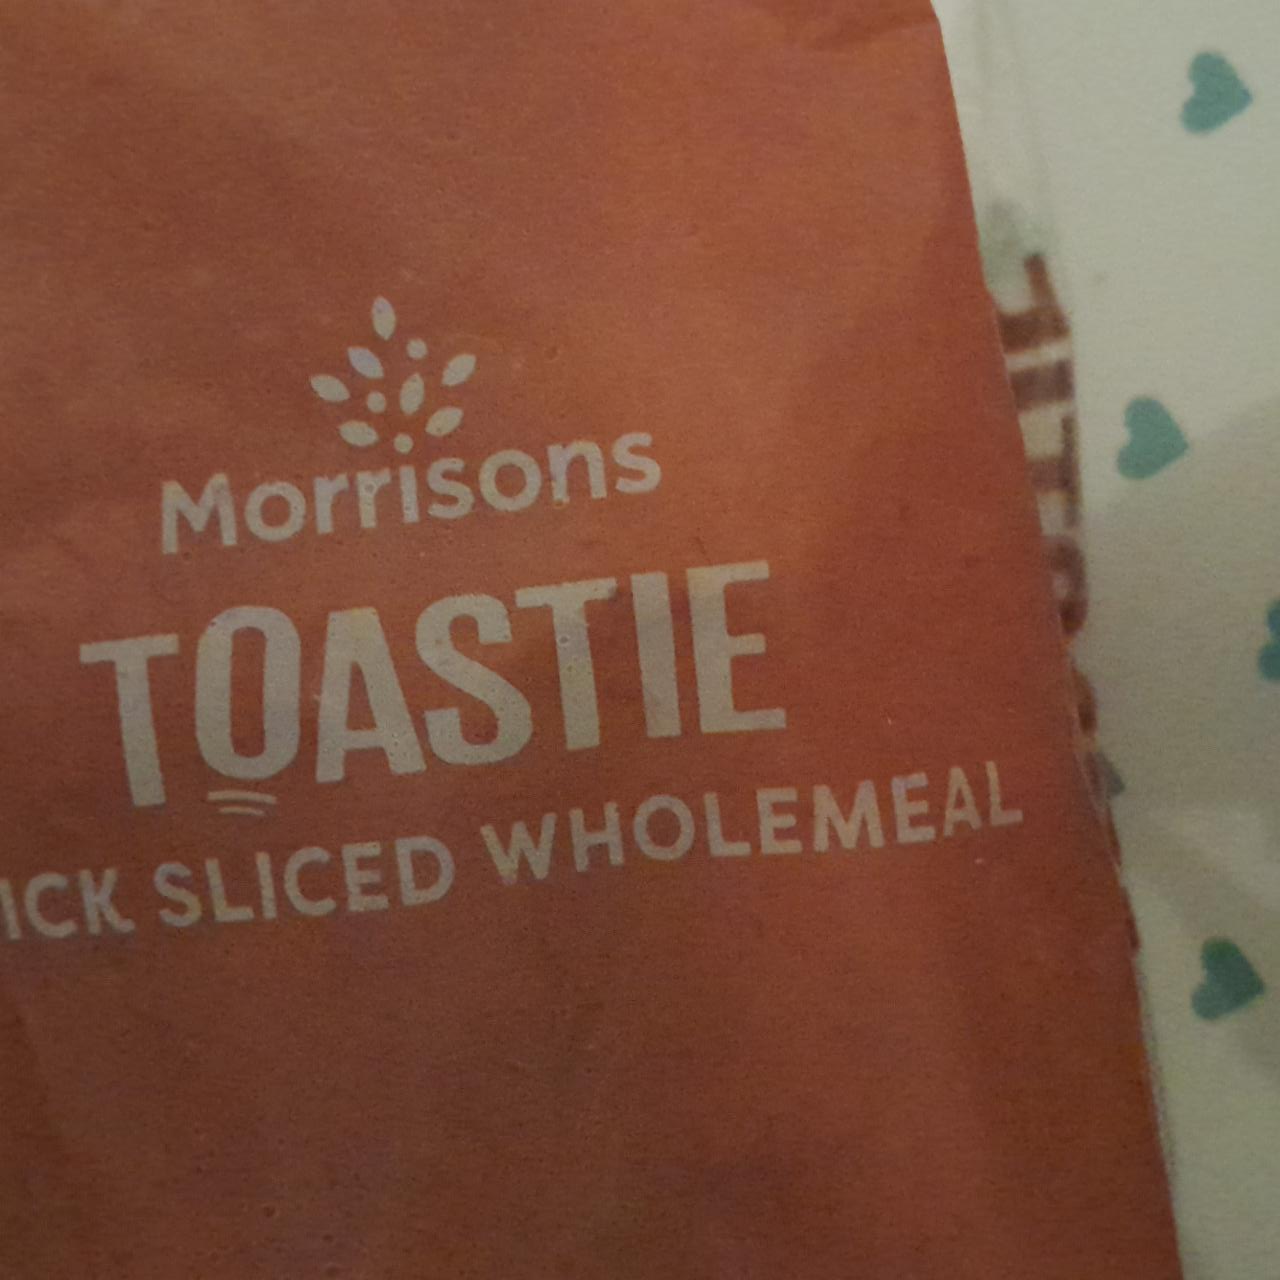 Zdjęcia - Toastie thick sliced wholemeal Morrisons